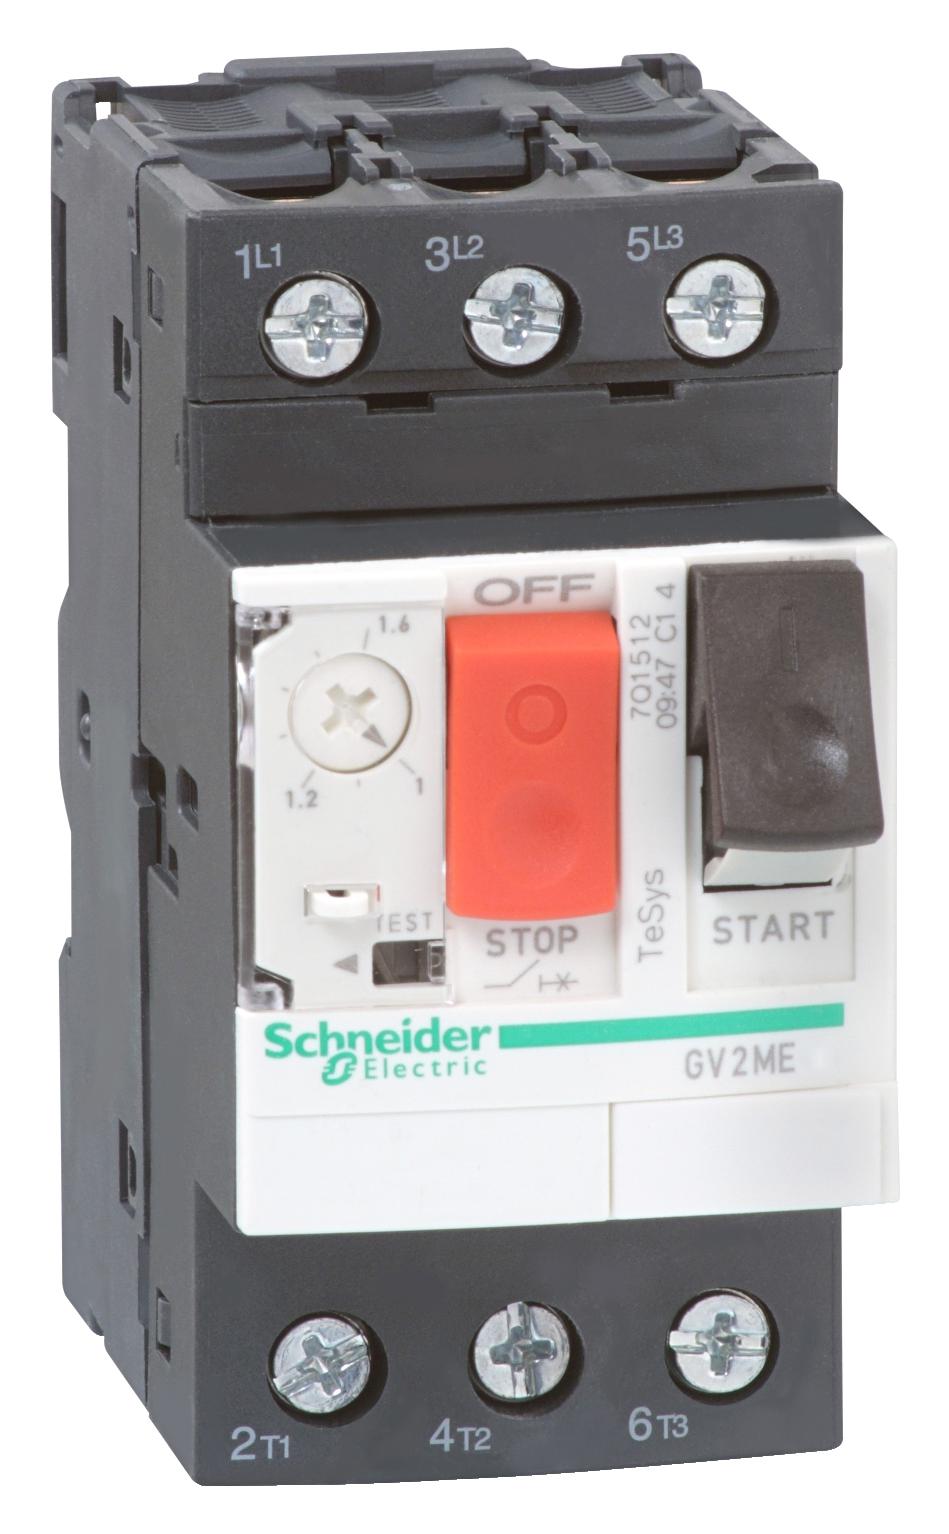 GV2ME146 MOTORCIRC BREAKERMGTH6 10LUGTER SCHNEIDER ELECTRIC